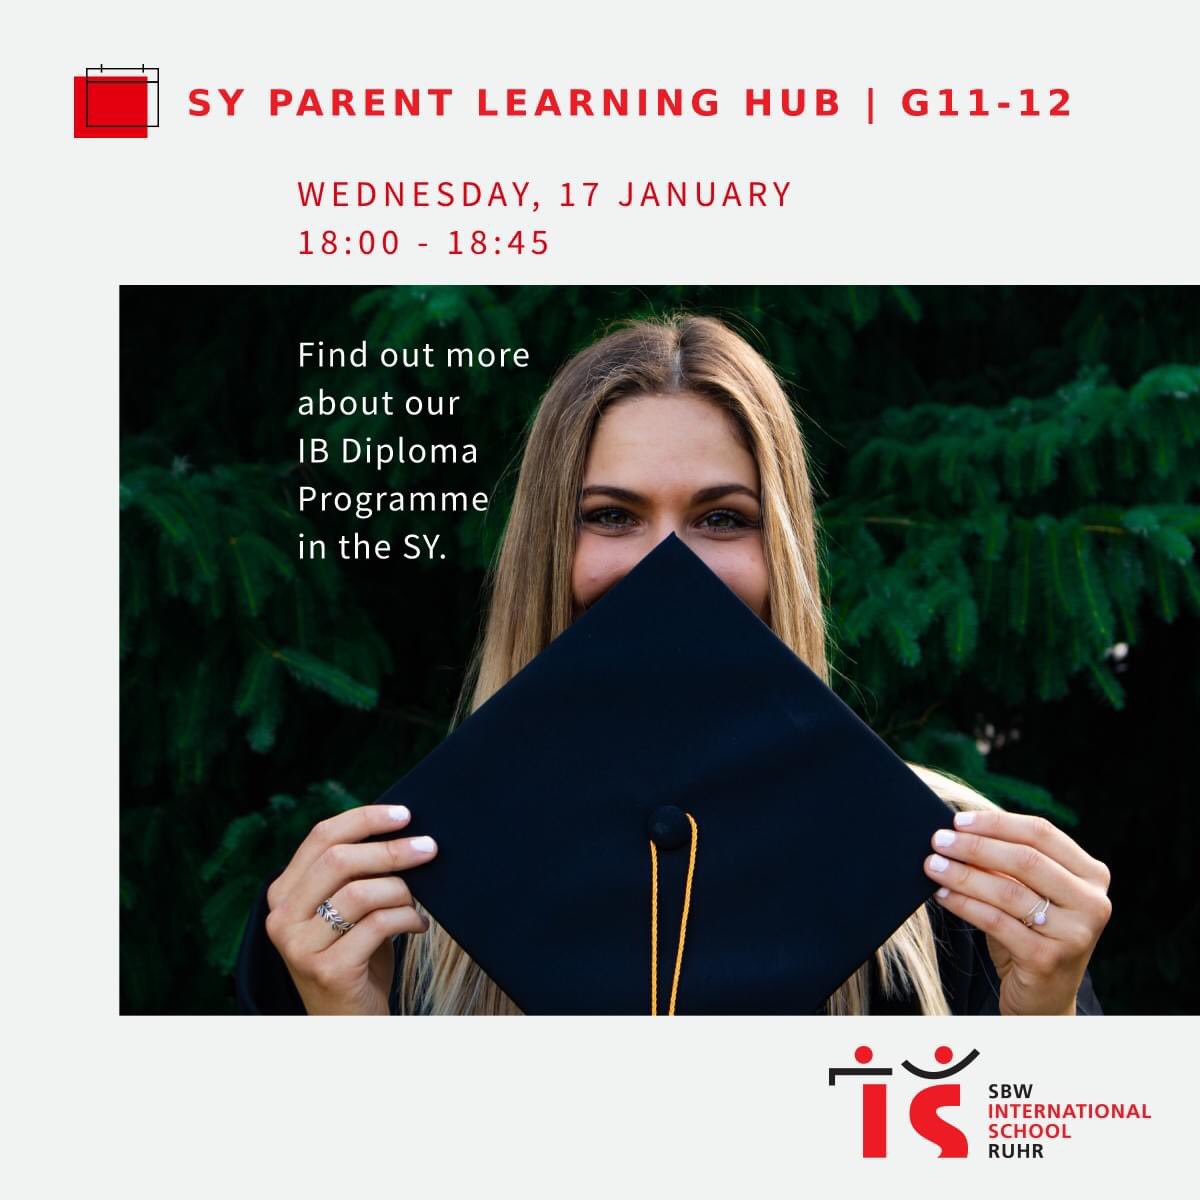 🎓 Parents and guardians: Are you interested in learning more about the IB Diploma Programme (IB DP) at International School Ruhr? If so, join us for our #IBDP Parent Learning Hub this Wednesday, January 17!

#isruhr #learningcommunity 

---

📸 Evan Mach, Unsplash